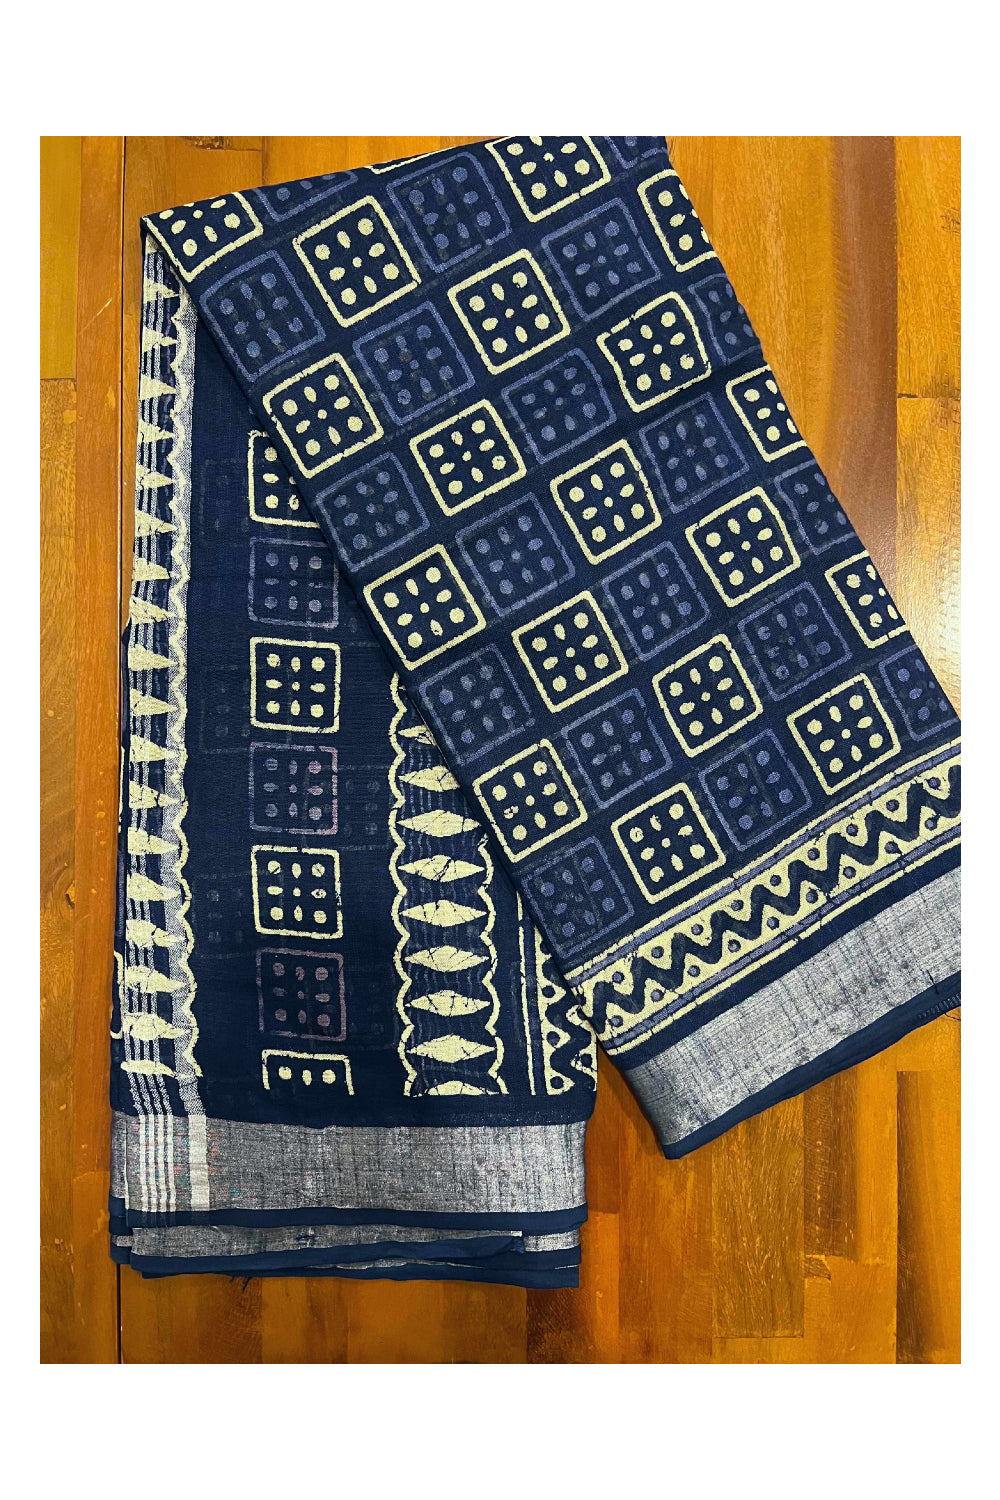 Southloom Linen Blue and White Designer Saree with Tassels